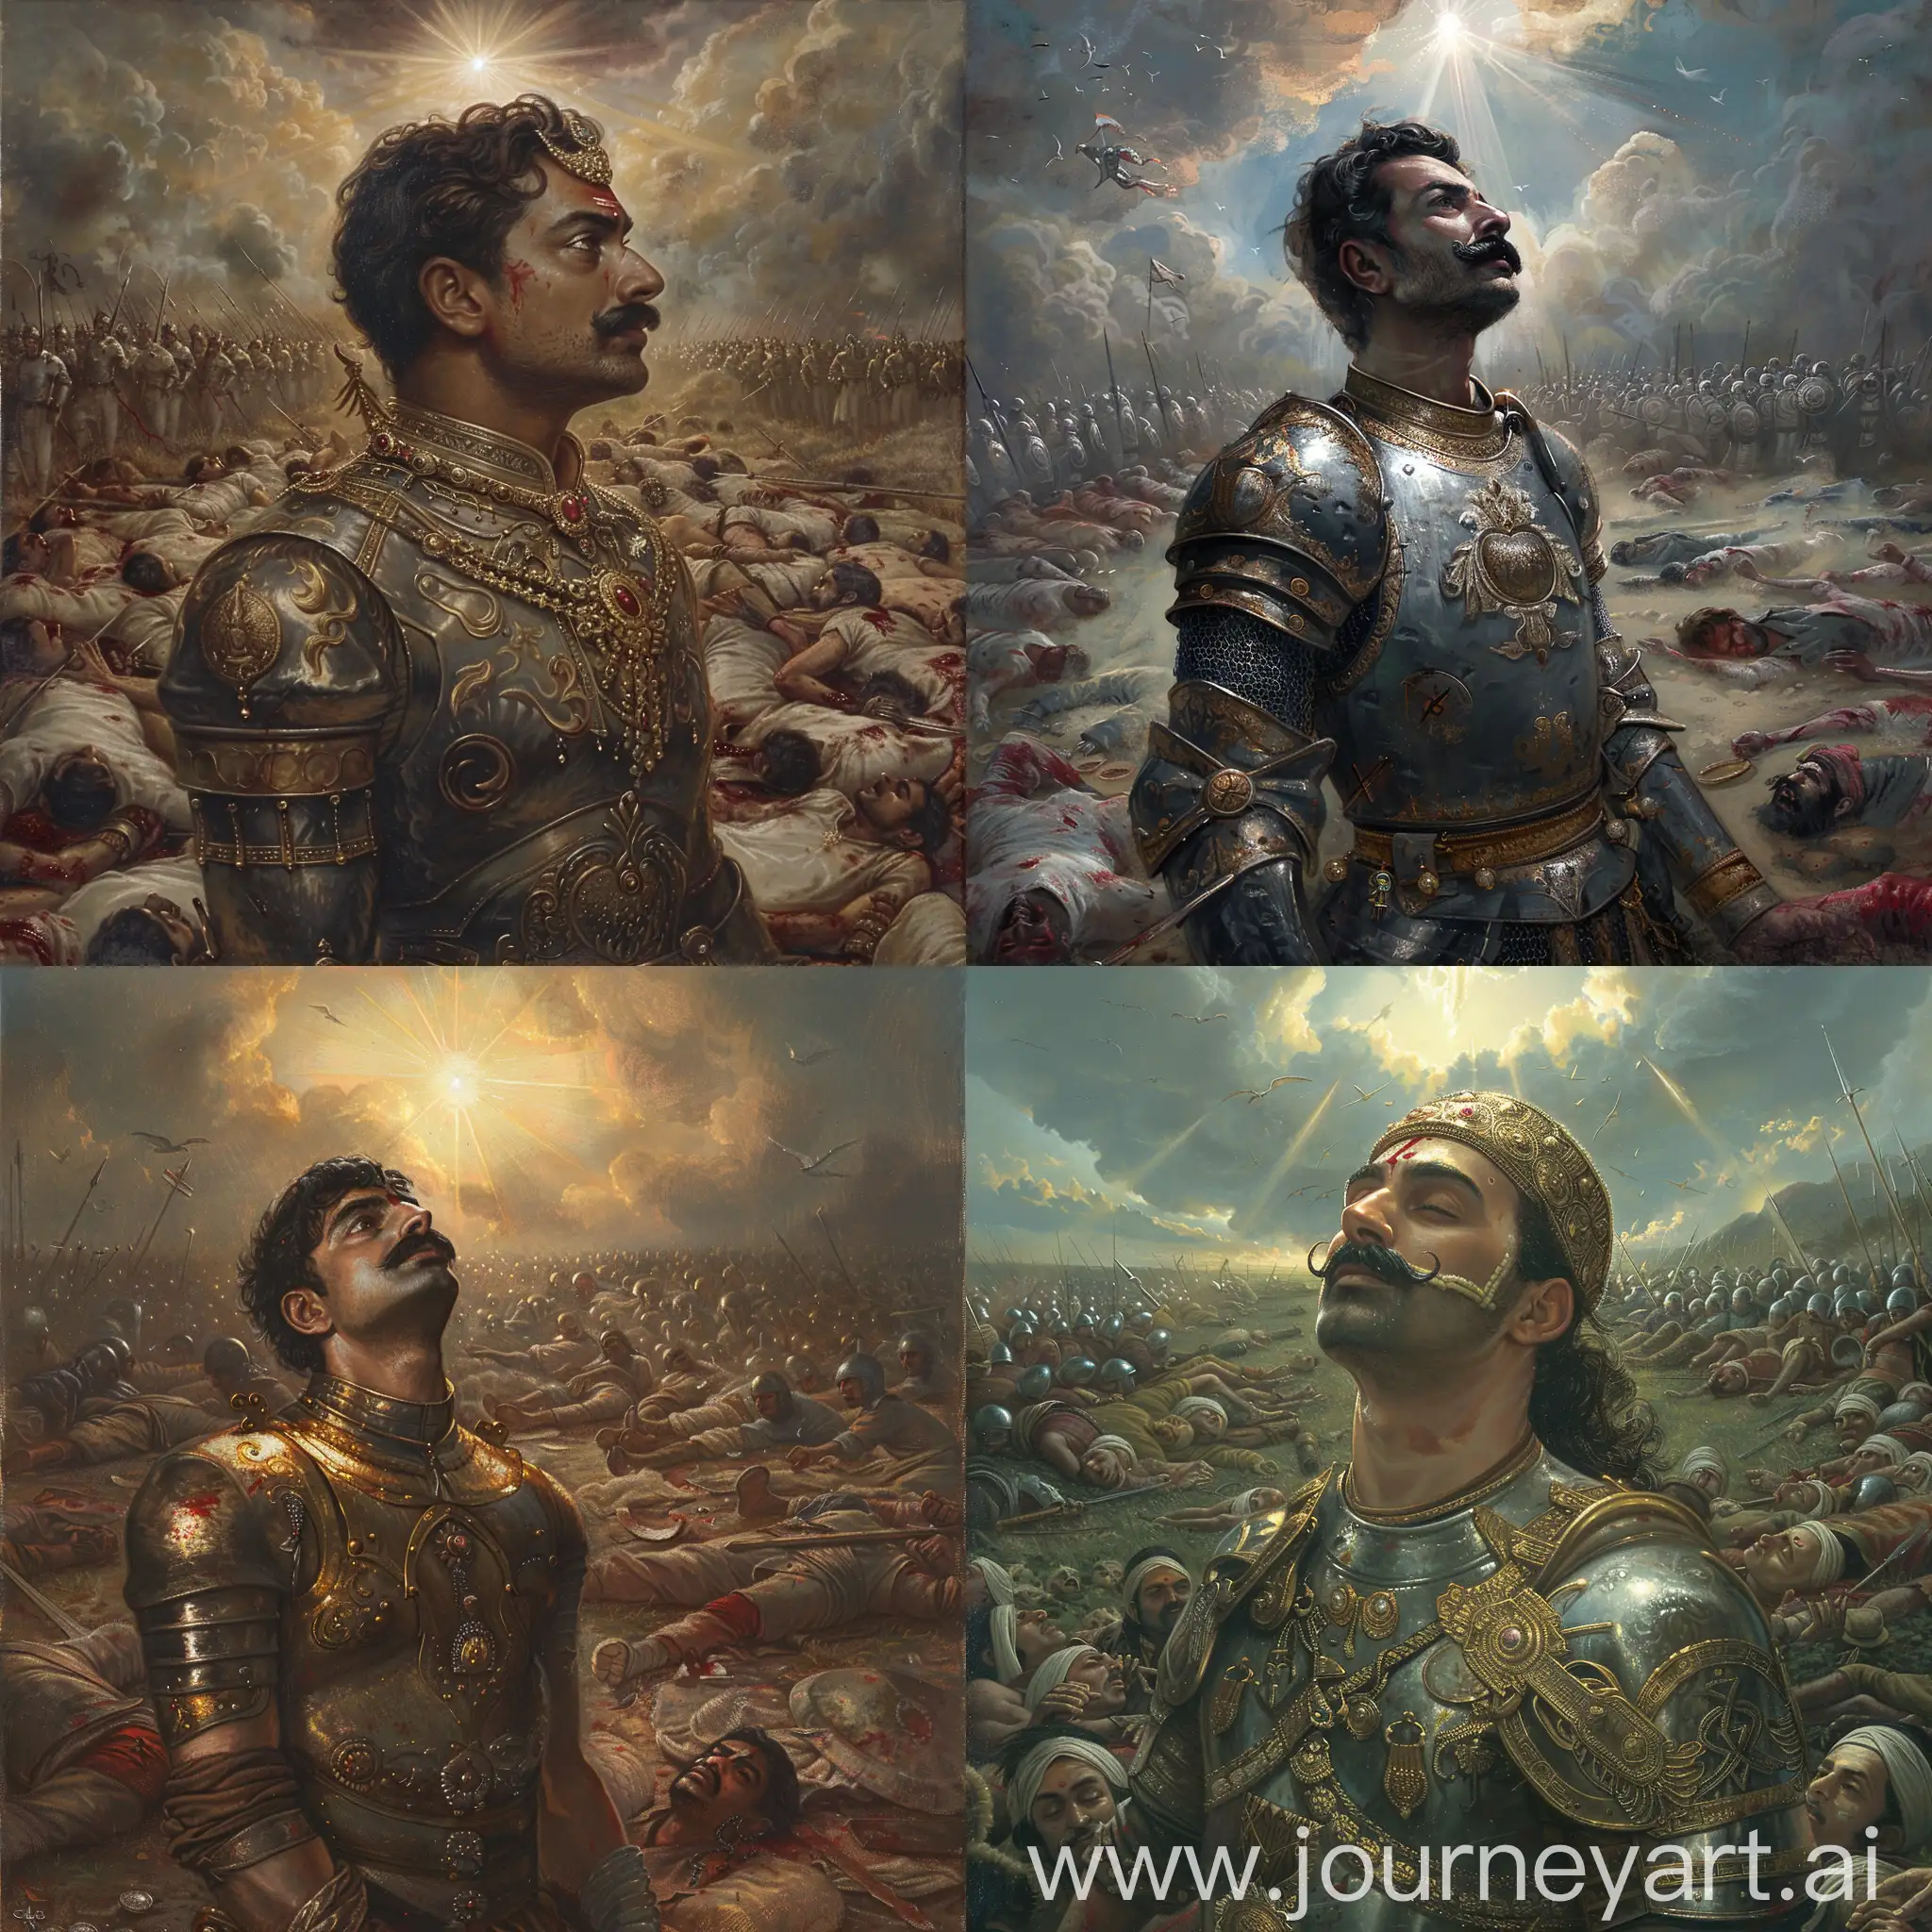 Year is 1600 CE. Imagine a rajput warrior wearing armor, moustache and clean shaved who is standing in a battlefield which is full of corpses of rajput and mughal soldiers. The warrior is  calmly looking at the heavens above from which a light is shining upon him.